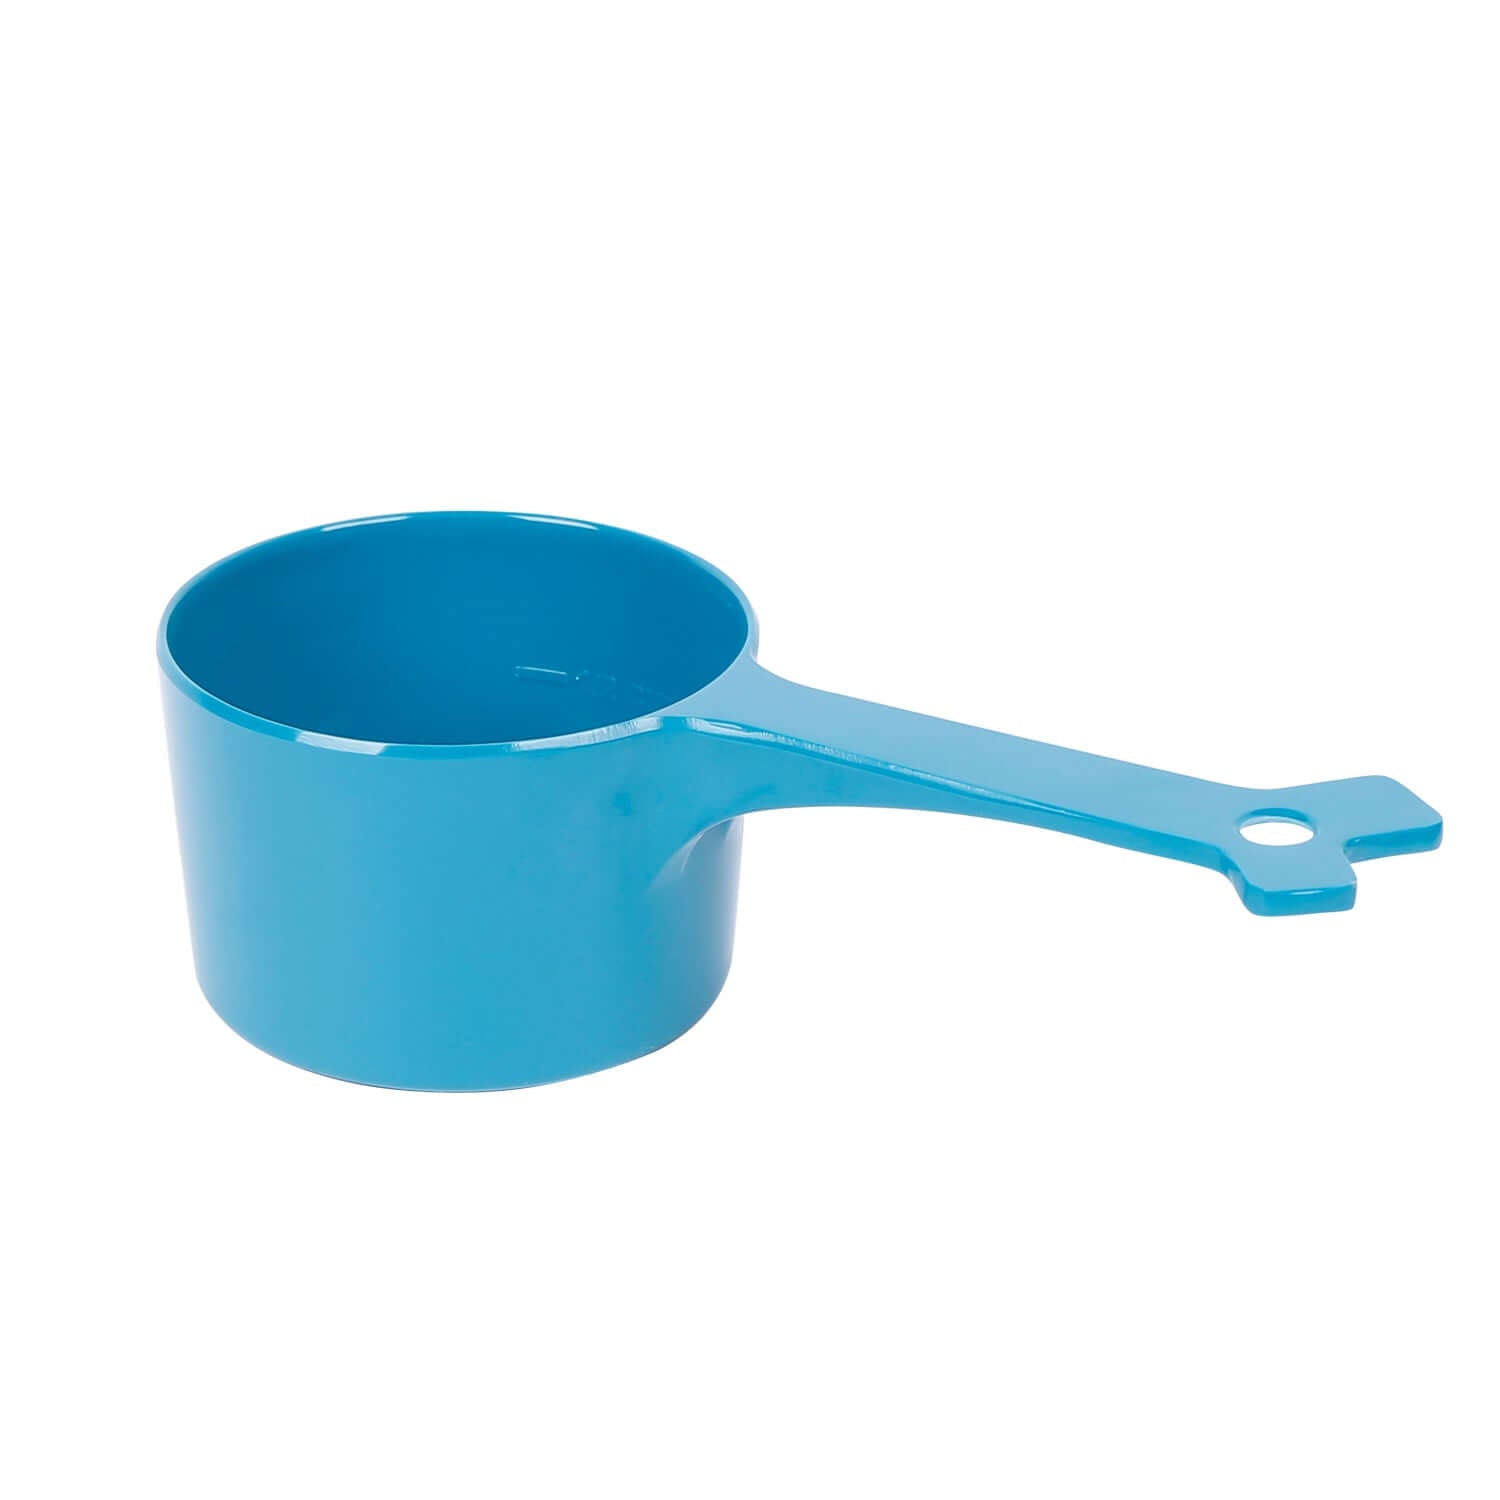 Blue melamine dog food scoop.  1 cup capacity with 1/2 cup fill line.  Dishwasher safe. 